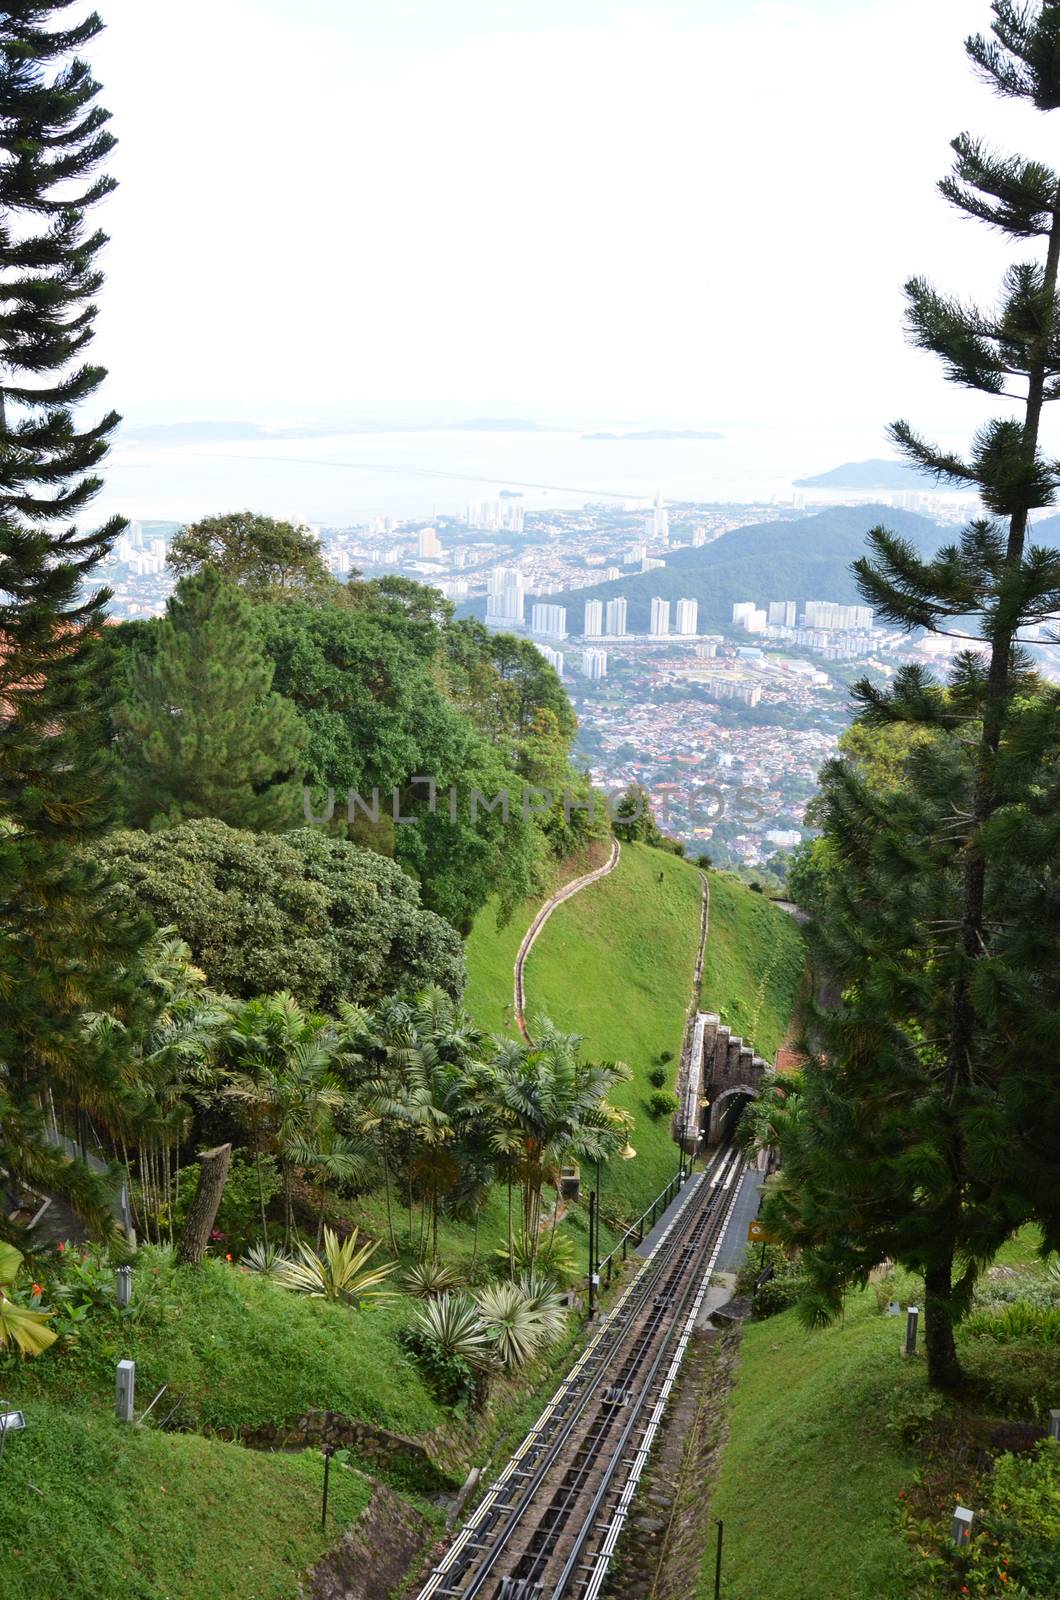 A tram railway on Penang Hil, Malaysia. by tang90246